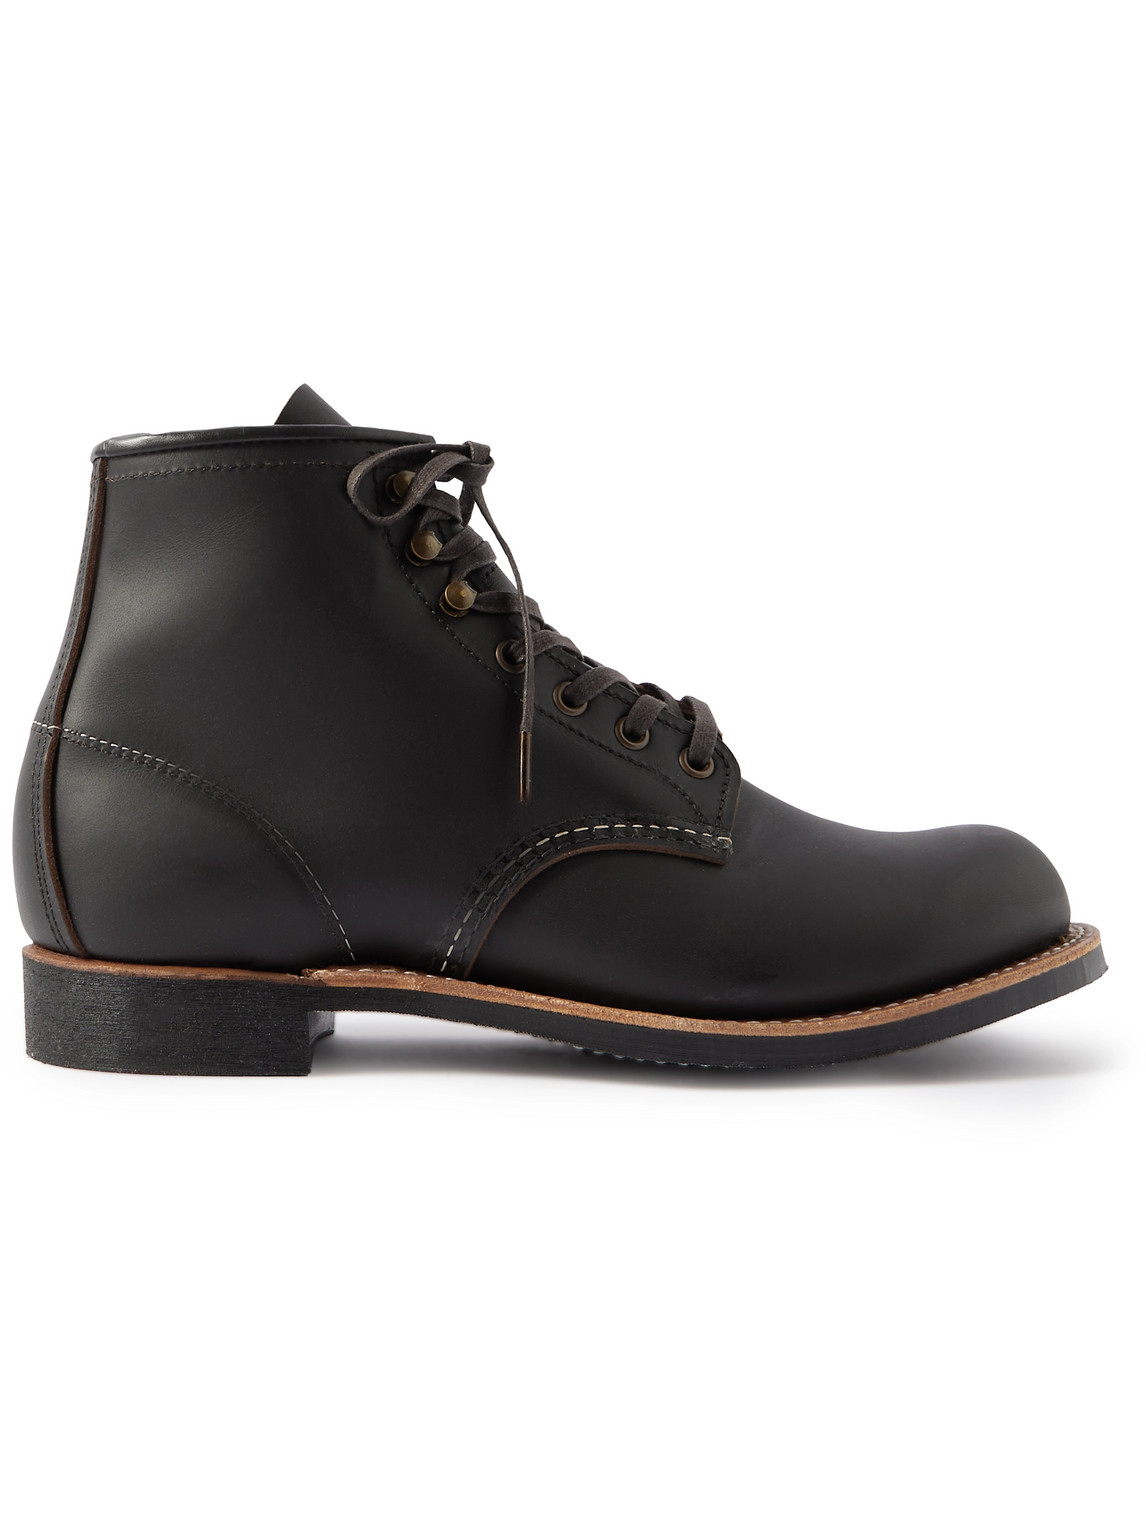 Red Wing Shoes Blacksmith Leather Boots